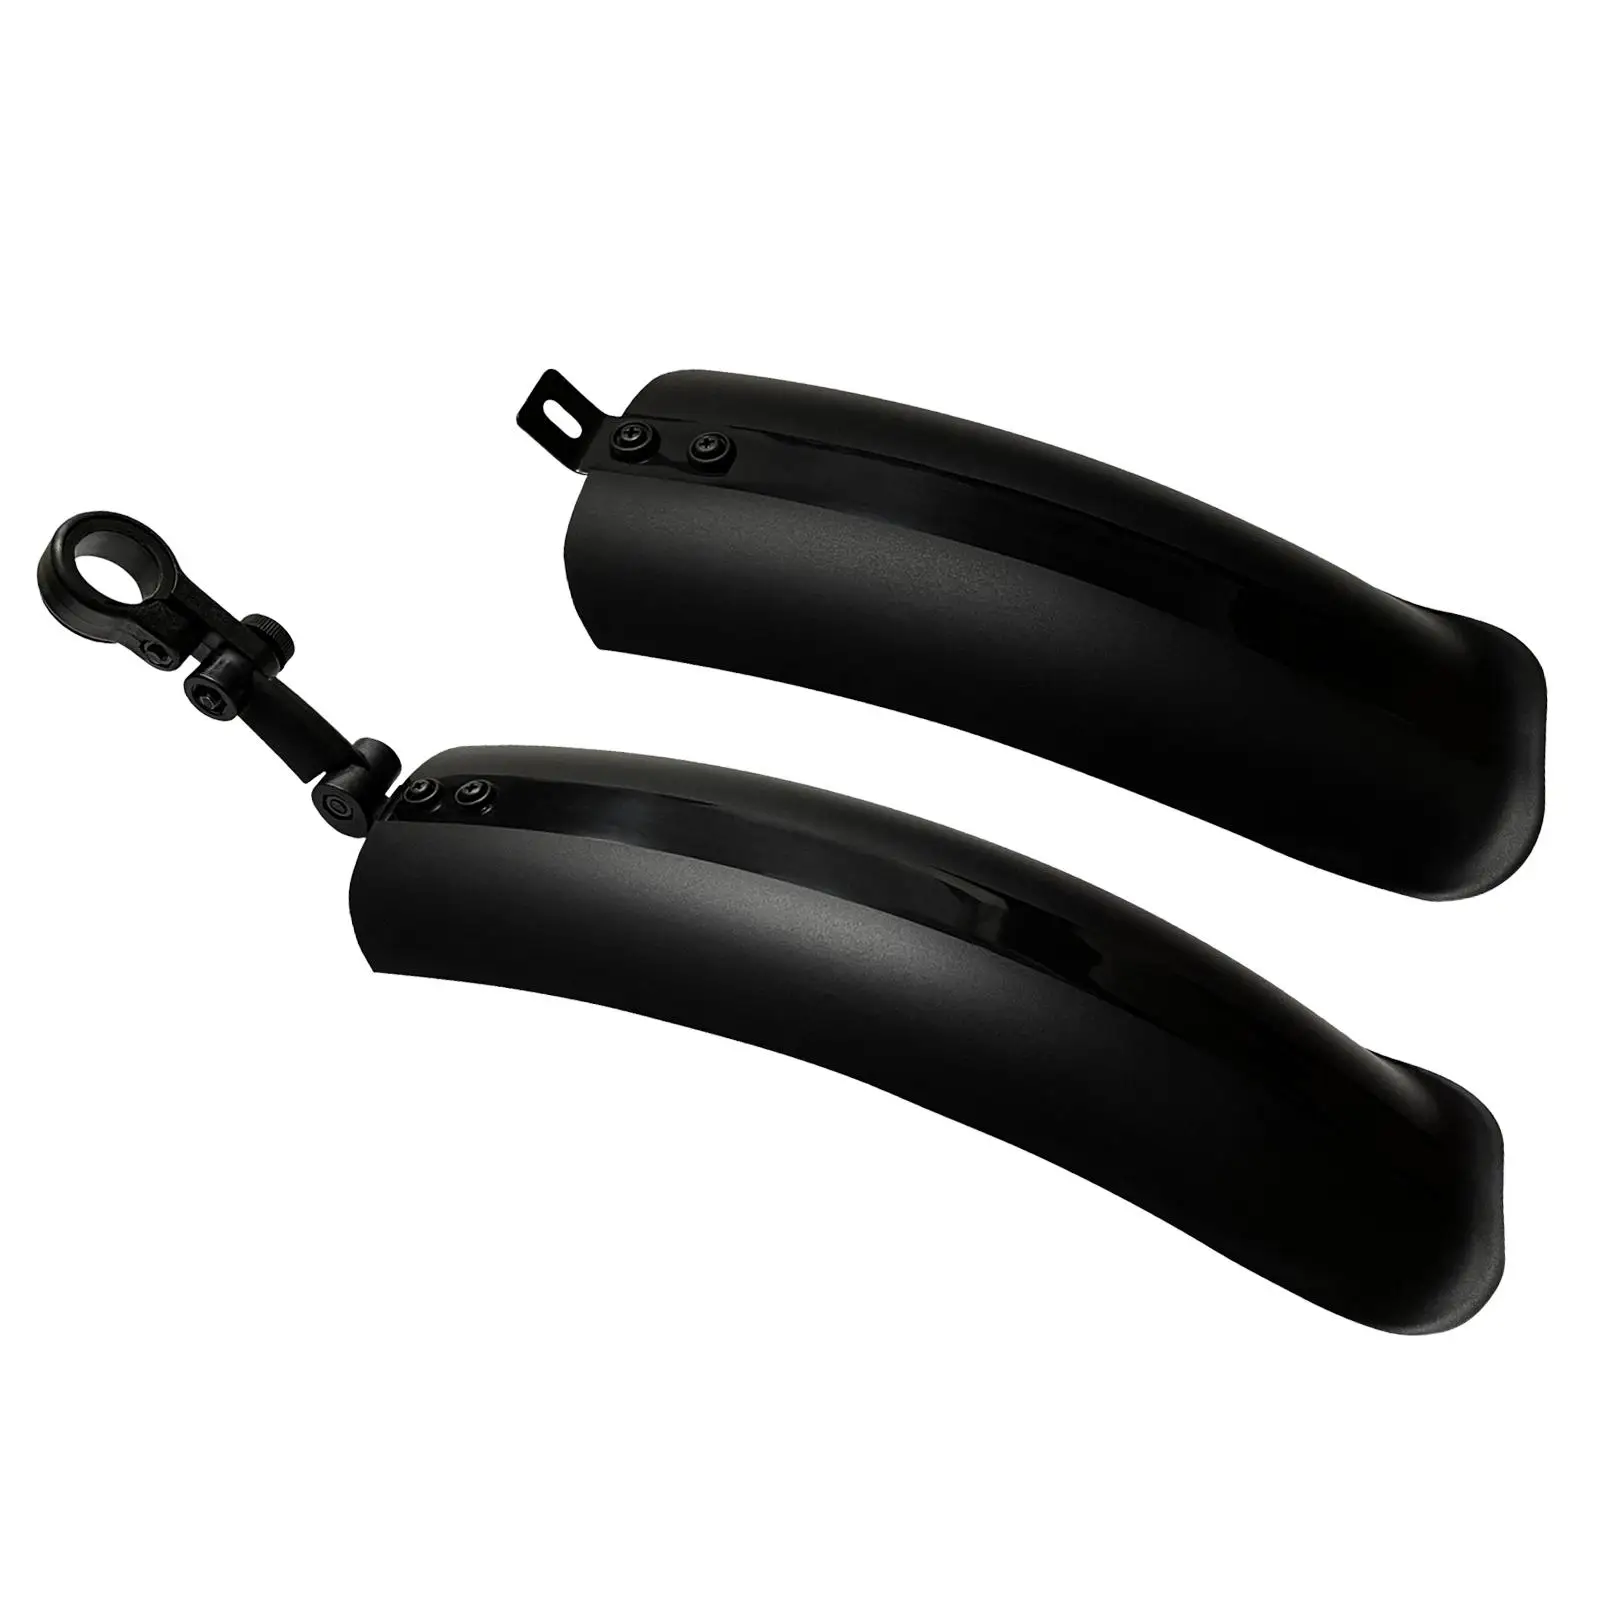 Bike Mudguard Front Rear Set Repair Easy to Install Supplies Mud Guard for